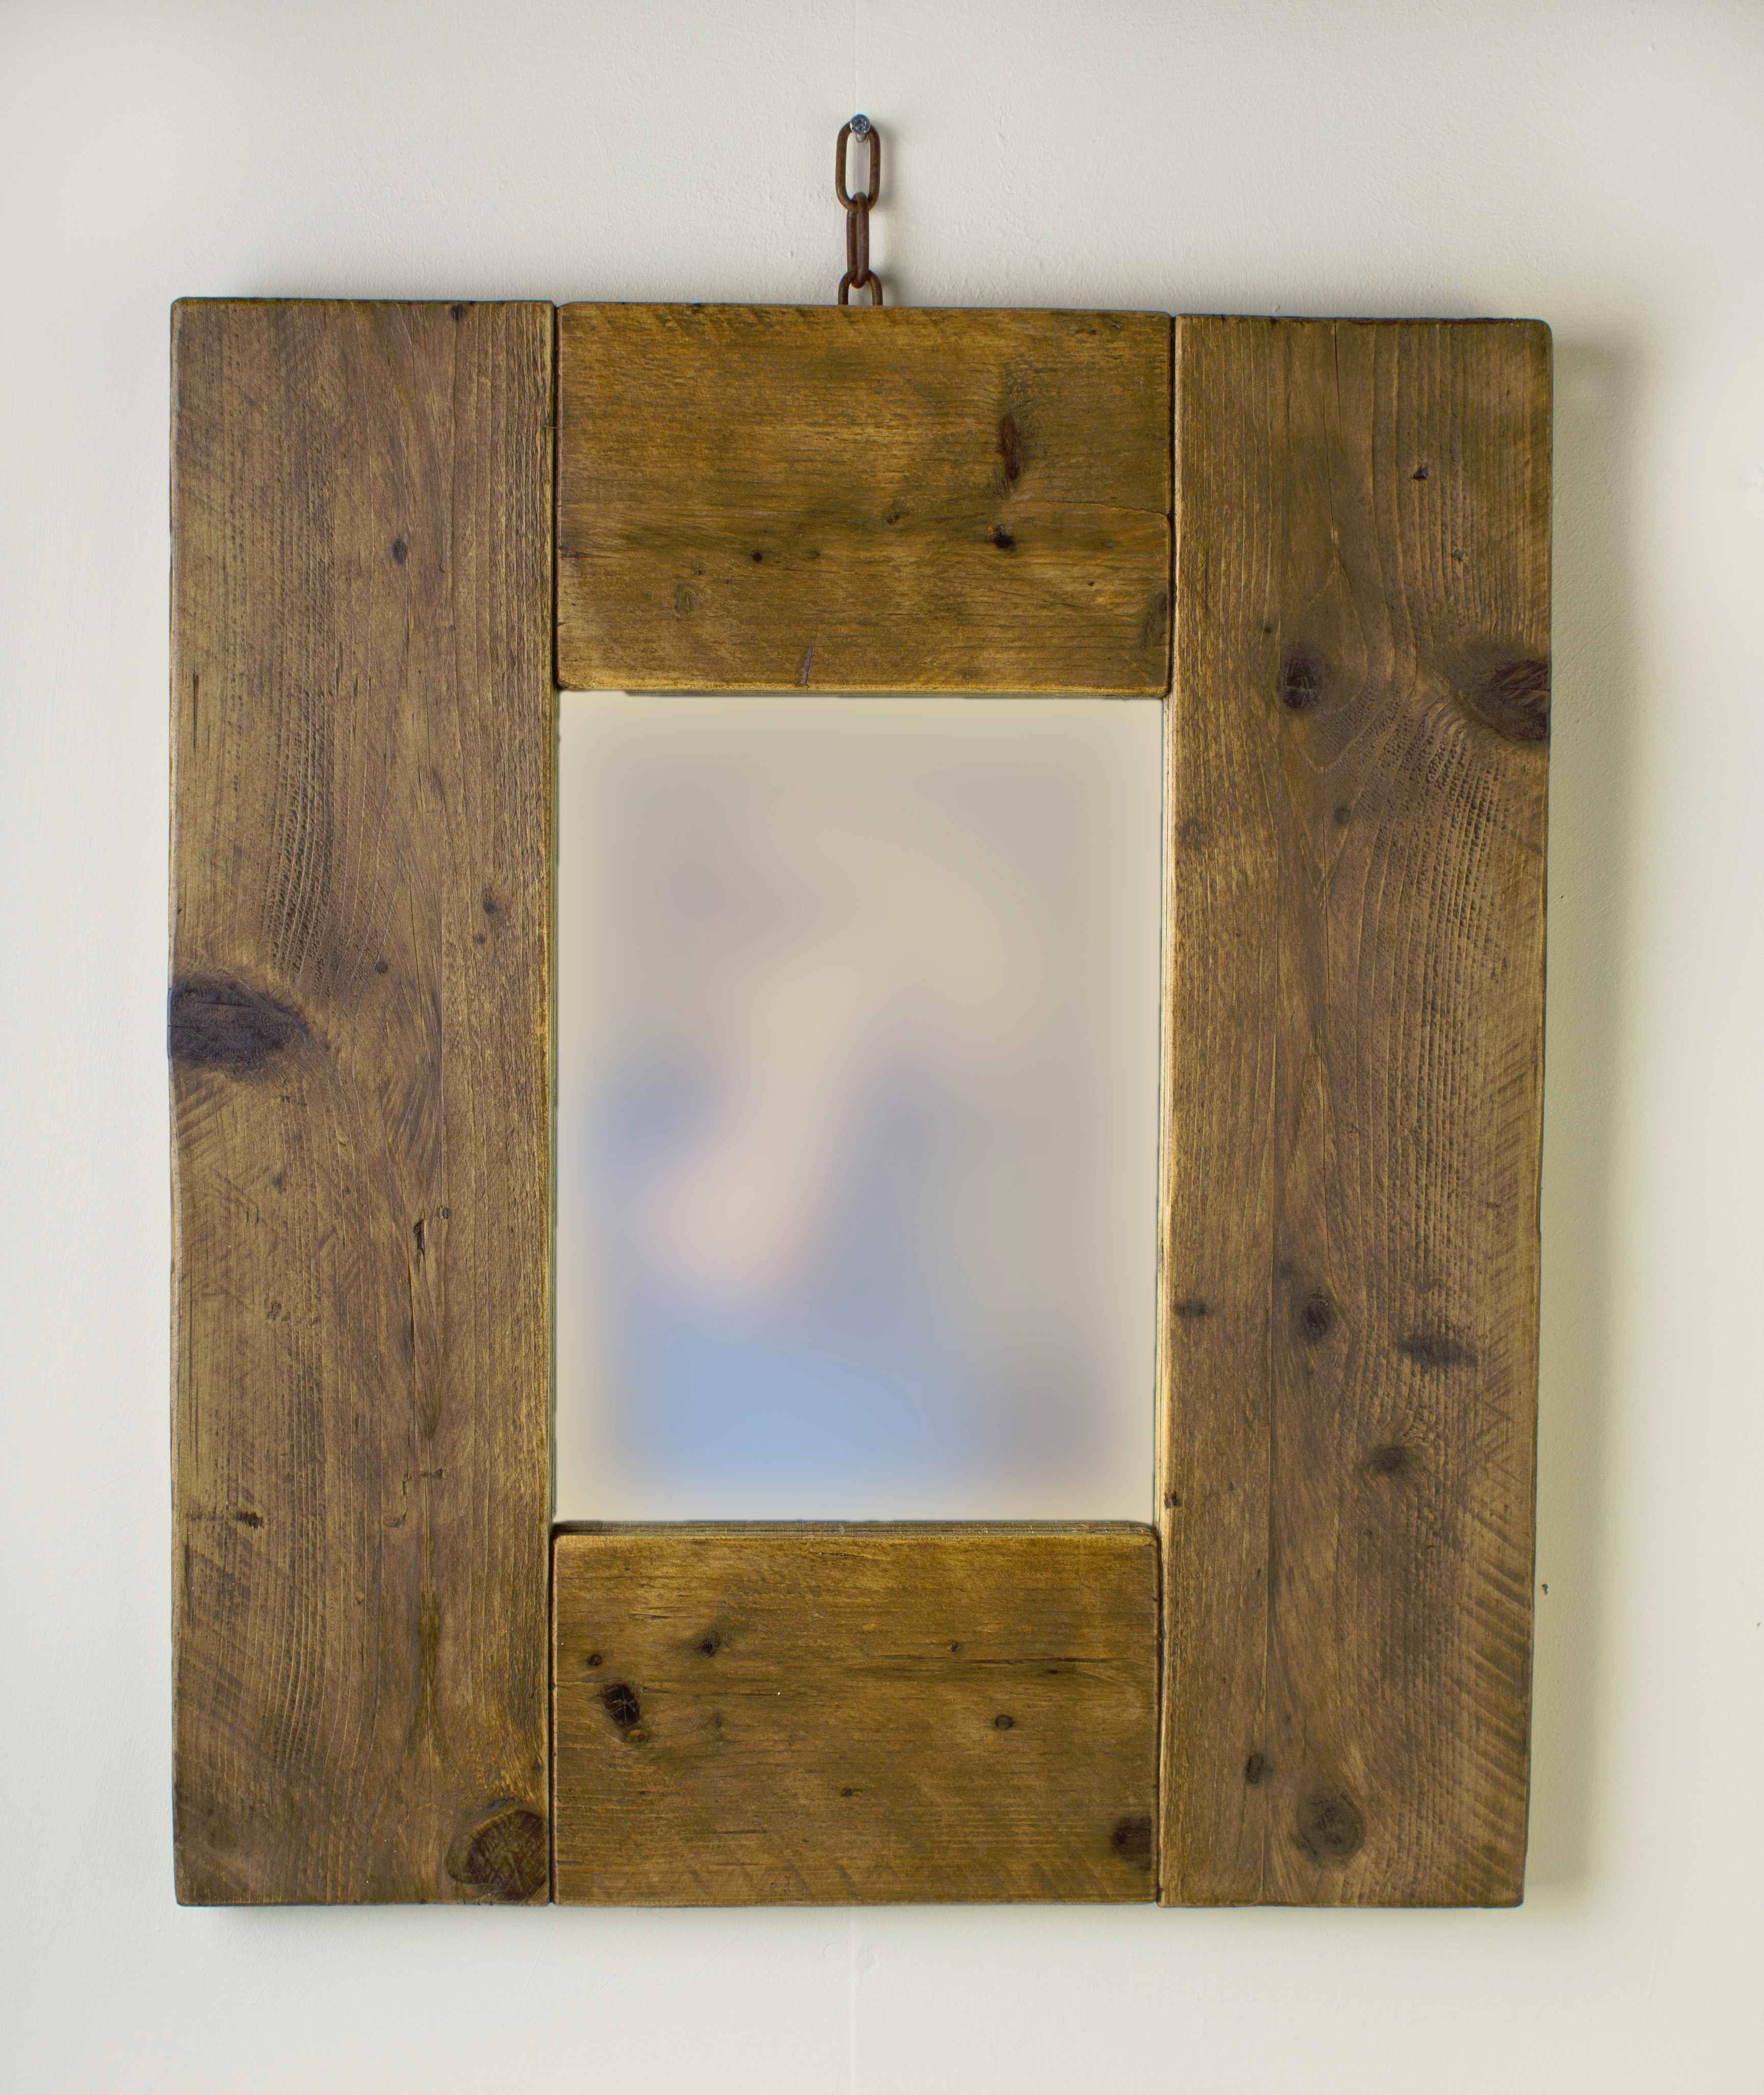 Duckydora | Reclaimed Wood Mirror, Distressed Mirror, Slate For Wooden Mirrors (View 7 of 15)